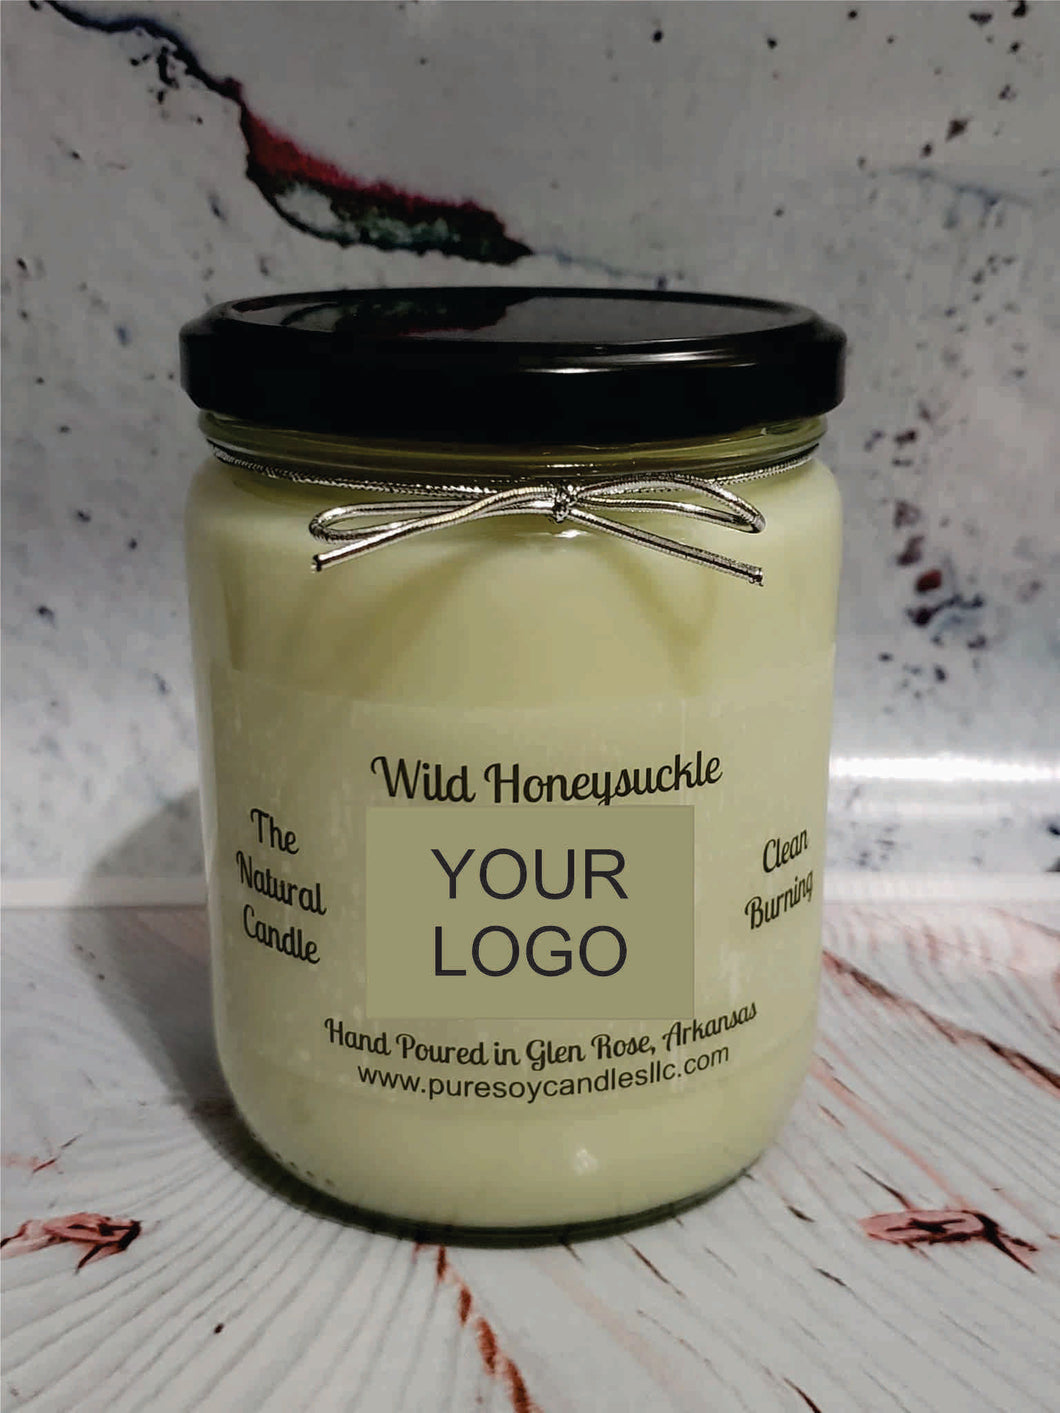 PRIVATE LABEL LARGE CLASSIC SOY CANDLE - APPROX. 15 OZ